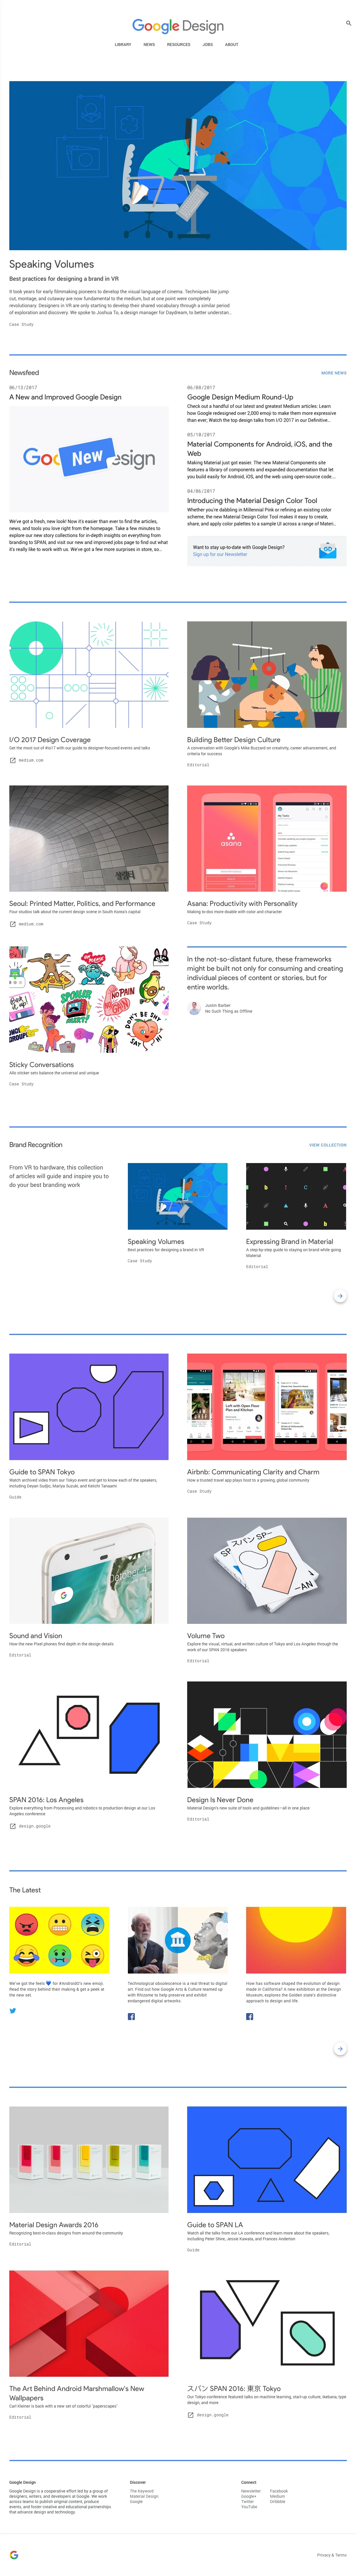 Google Design Landing Page Example: At Google we say, “Focus on the user and all else will follow.” With this in mind, we seek to design experiences that inspire and enlighten our users.